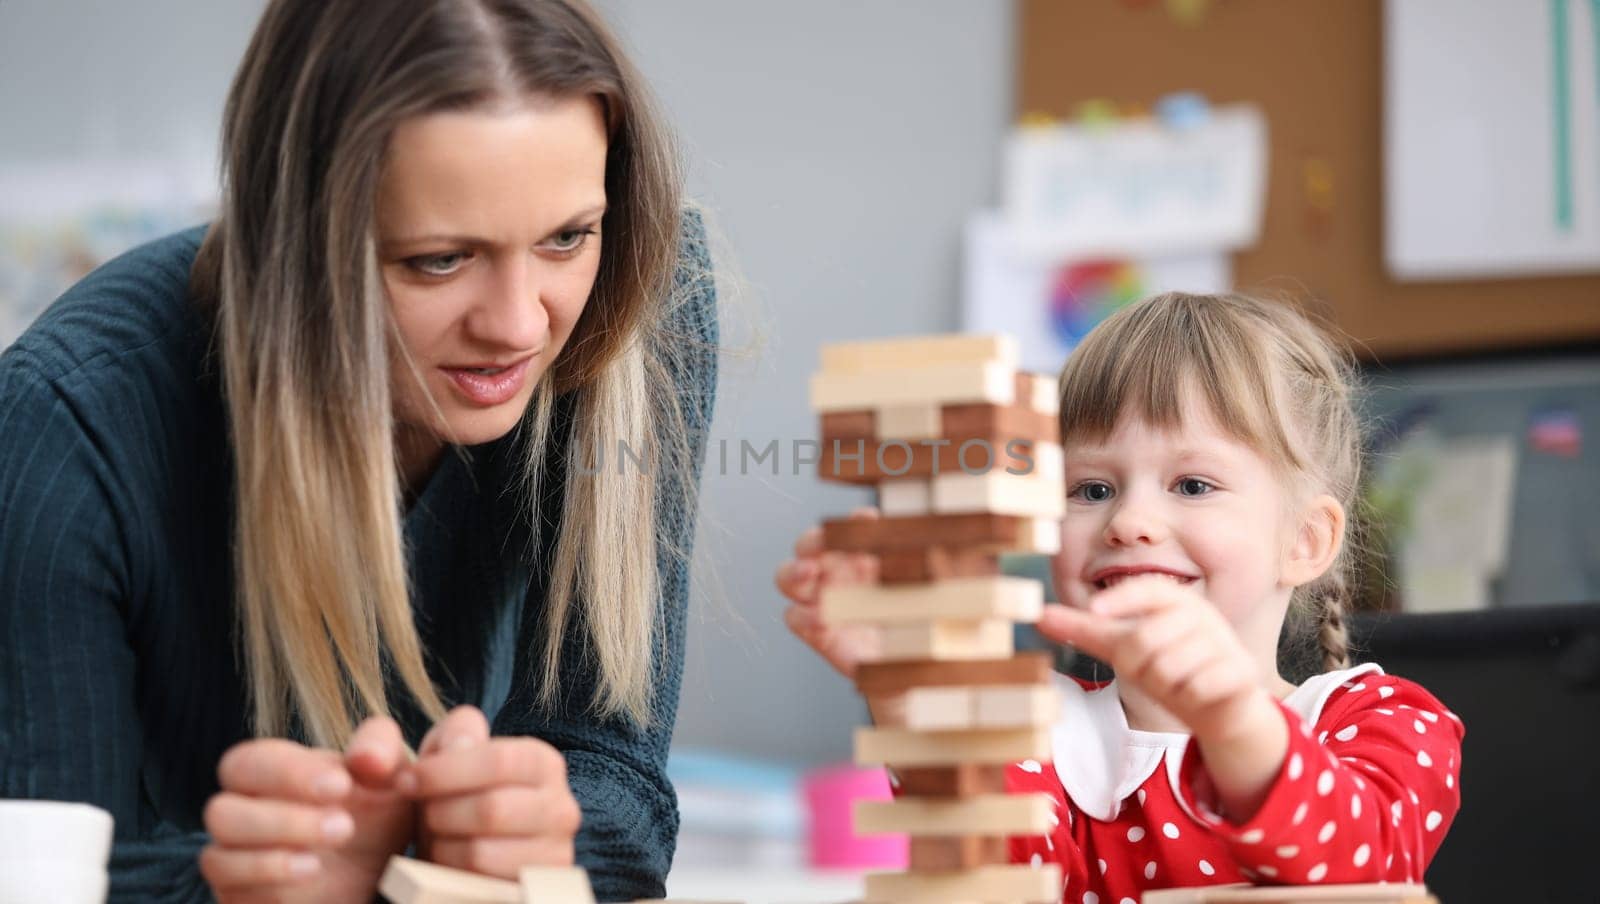 Mom and daughter stack blocks on top each other. Child is taught to choose right subject. Girl movements are awkward, inept and inharmonious. Children and adults communicate, play